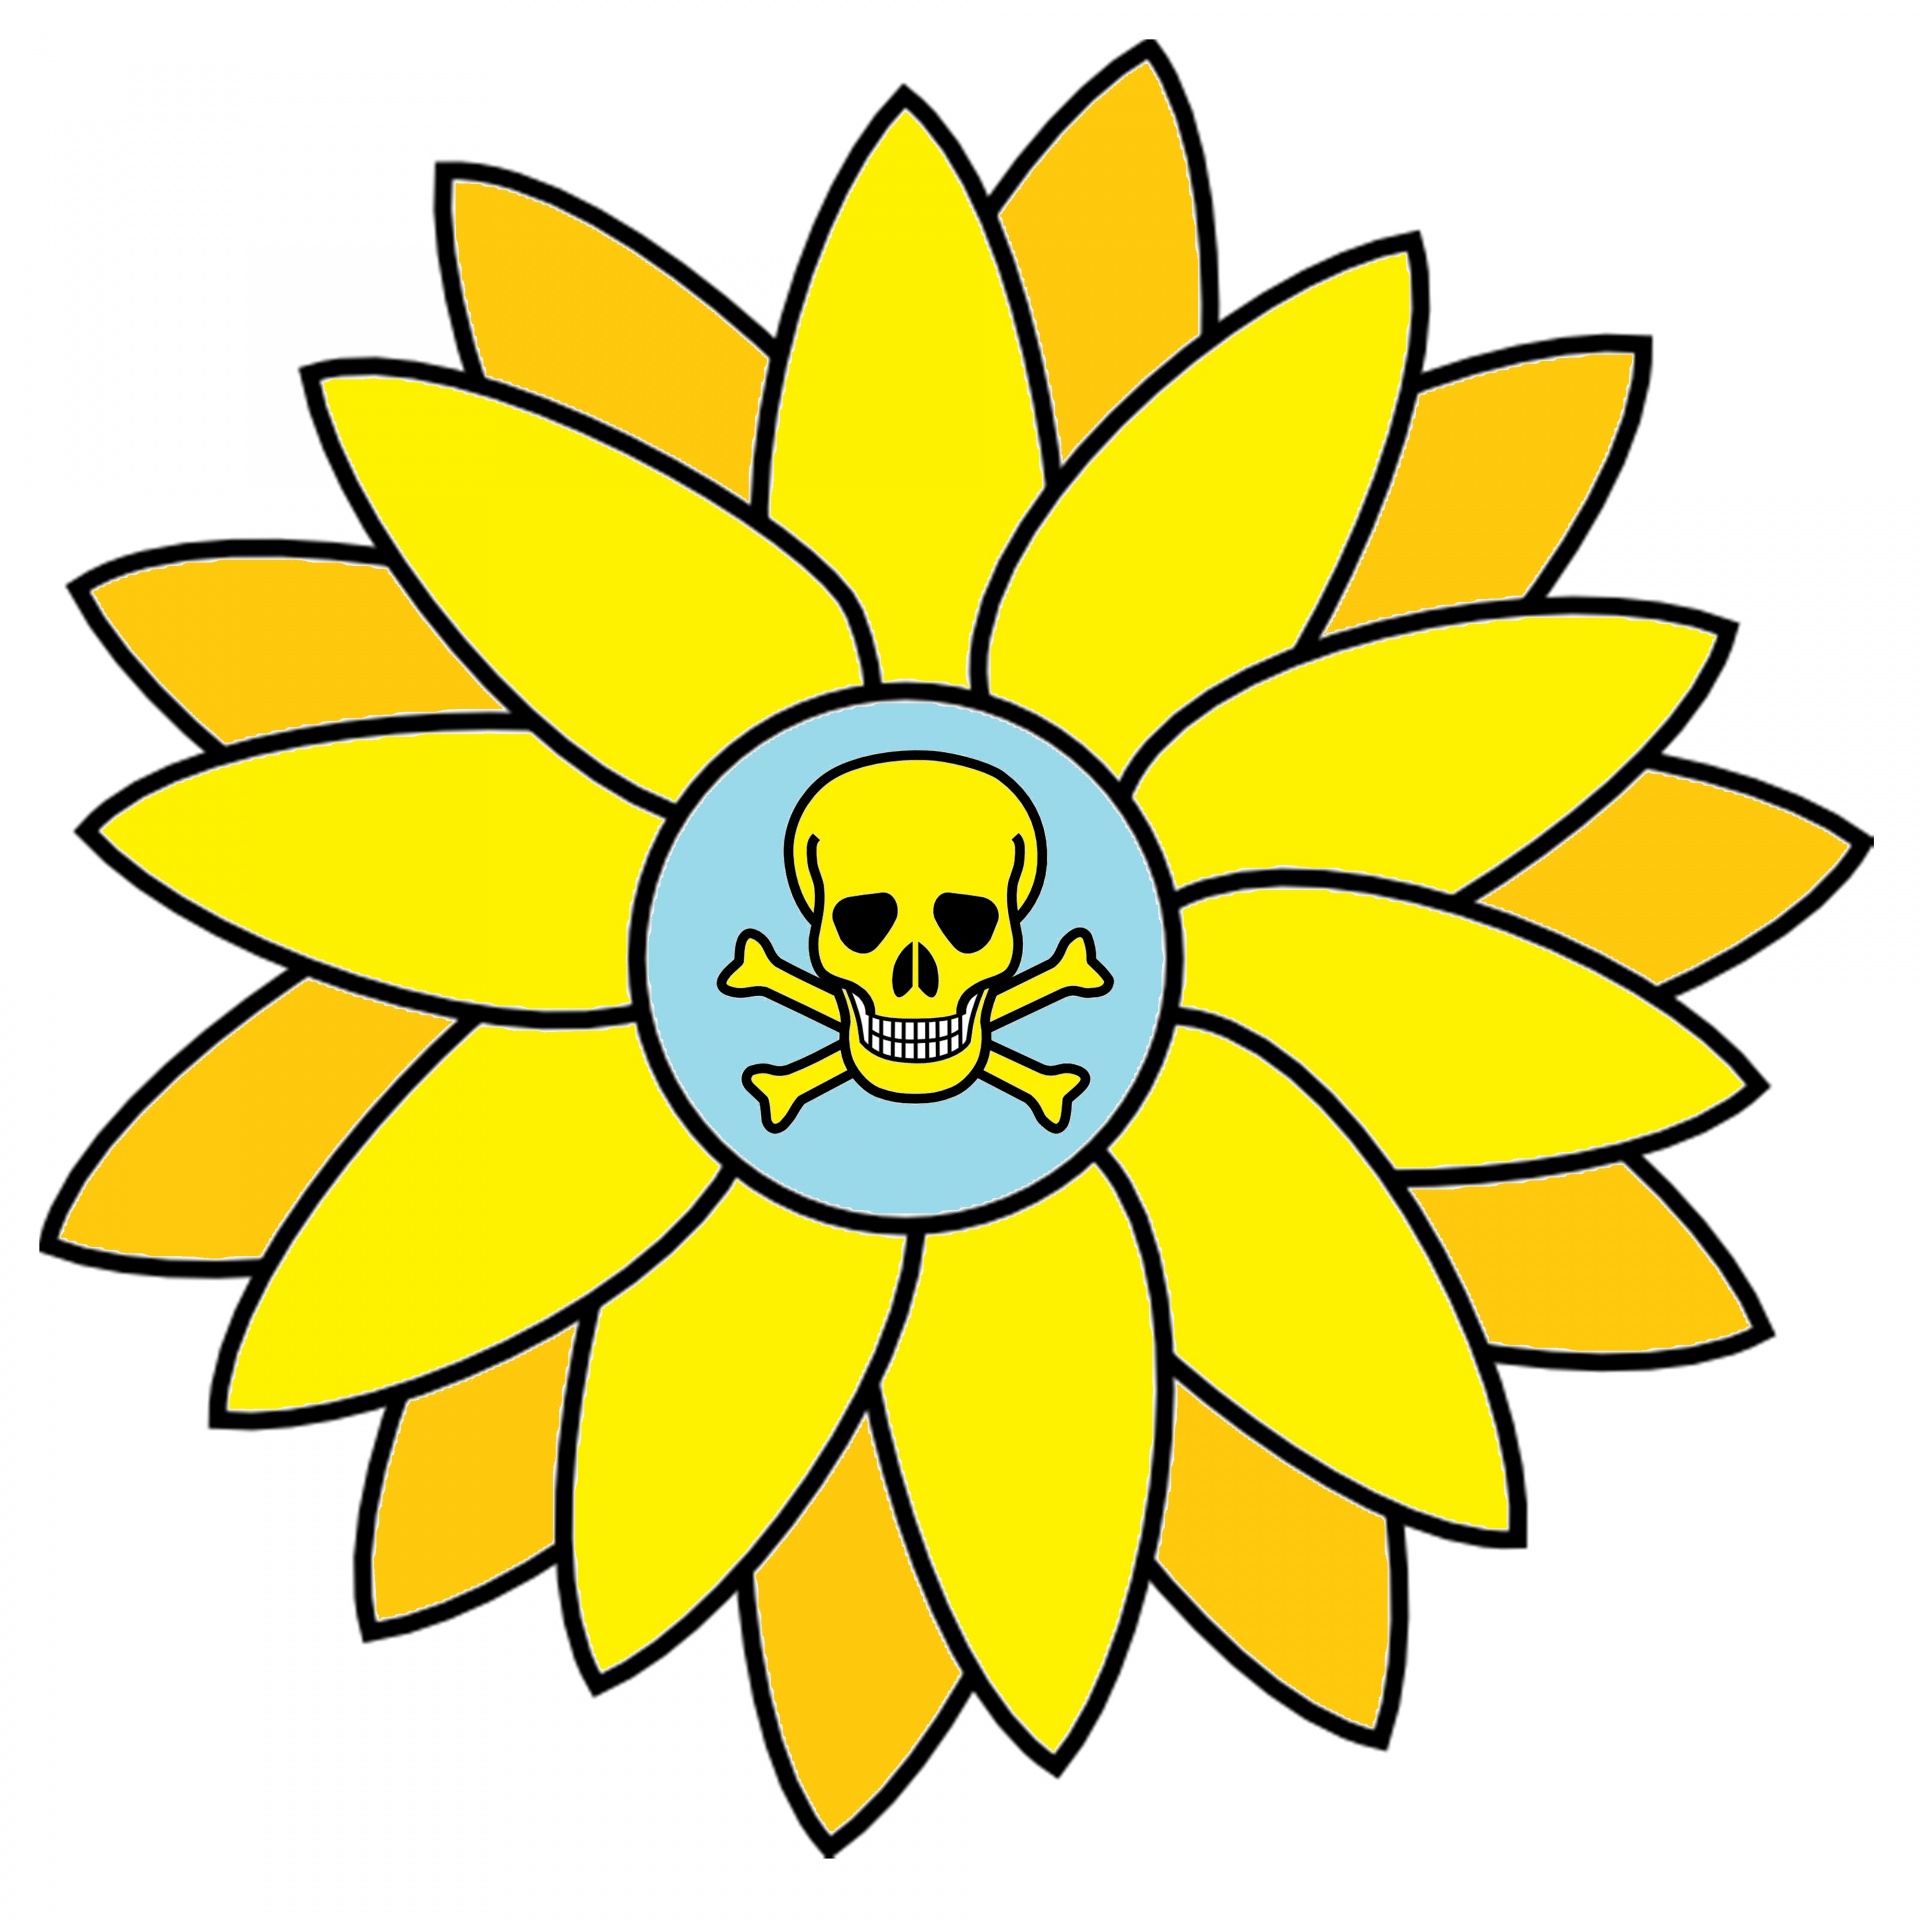 drawing sunflower scull free photo